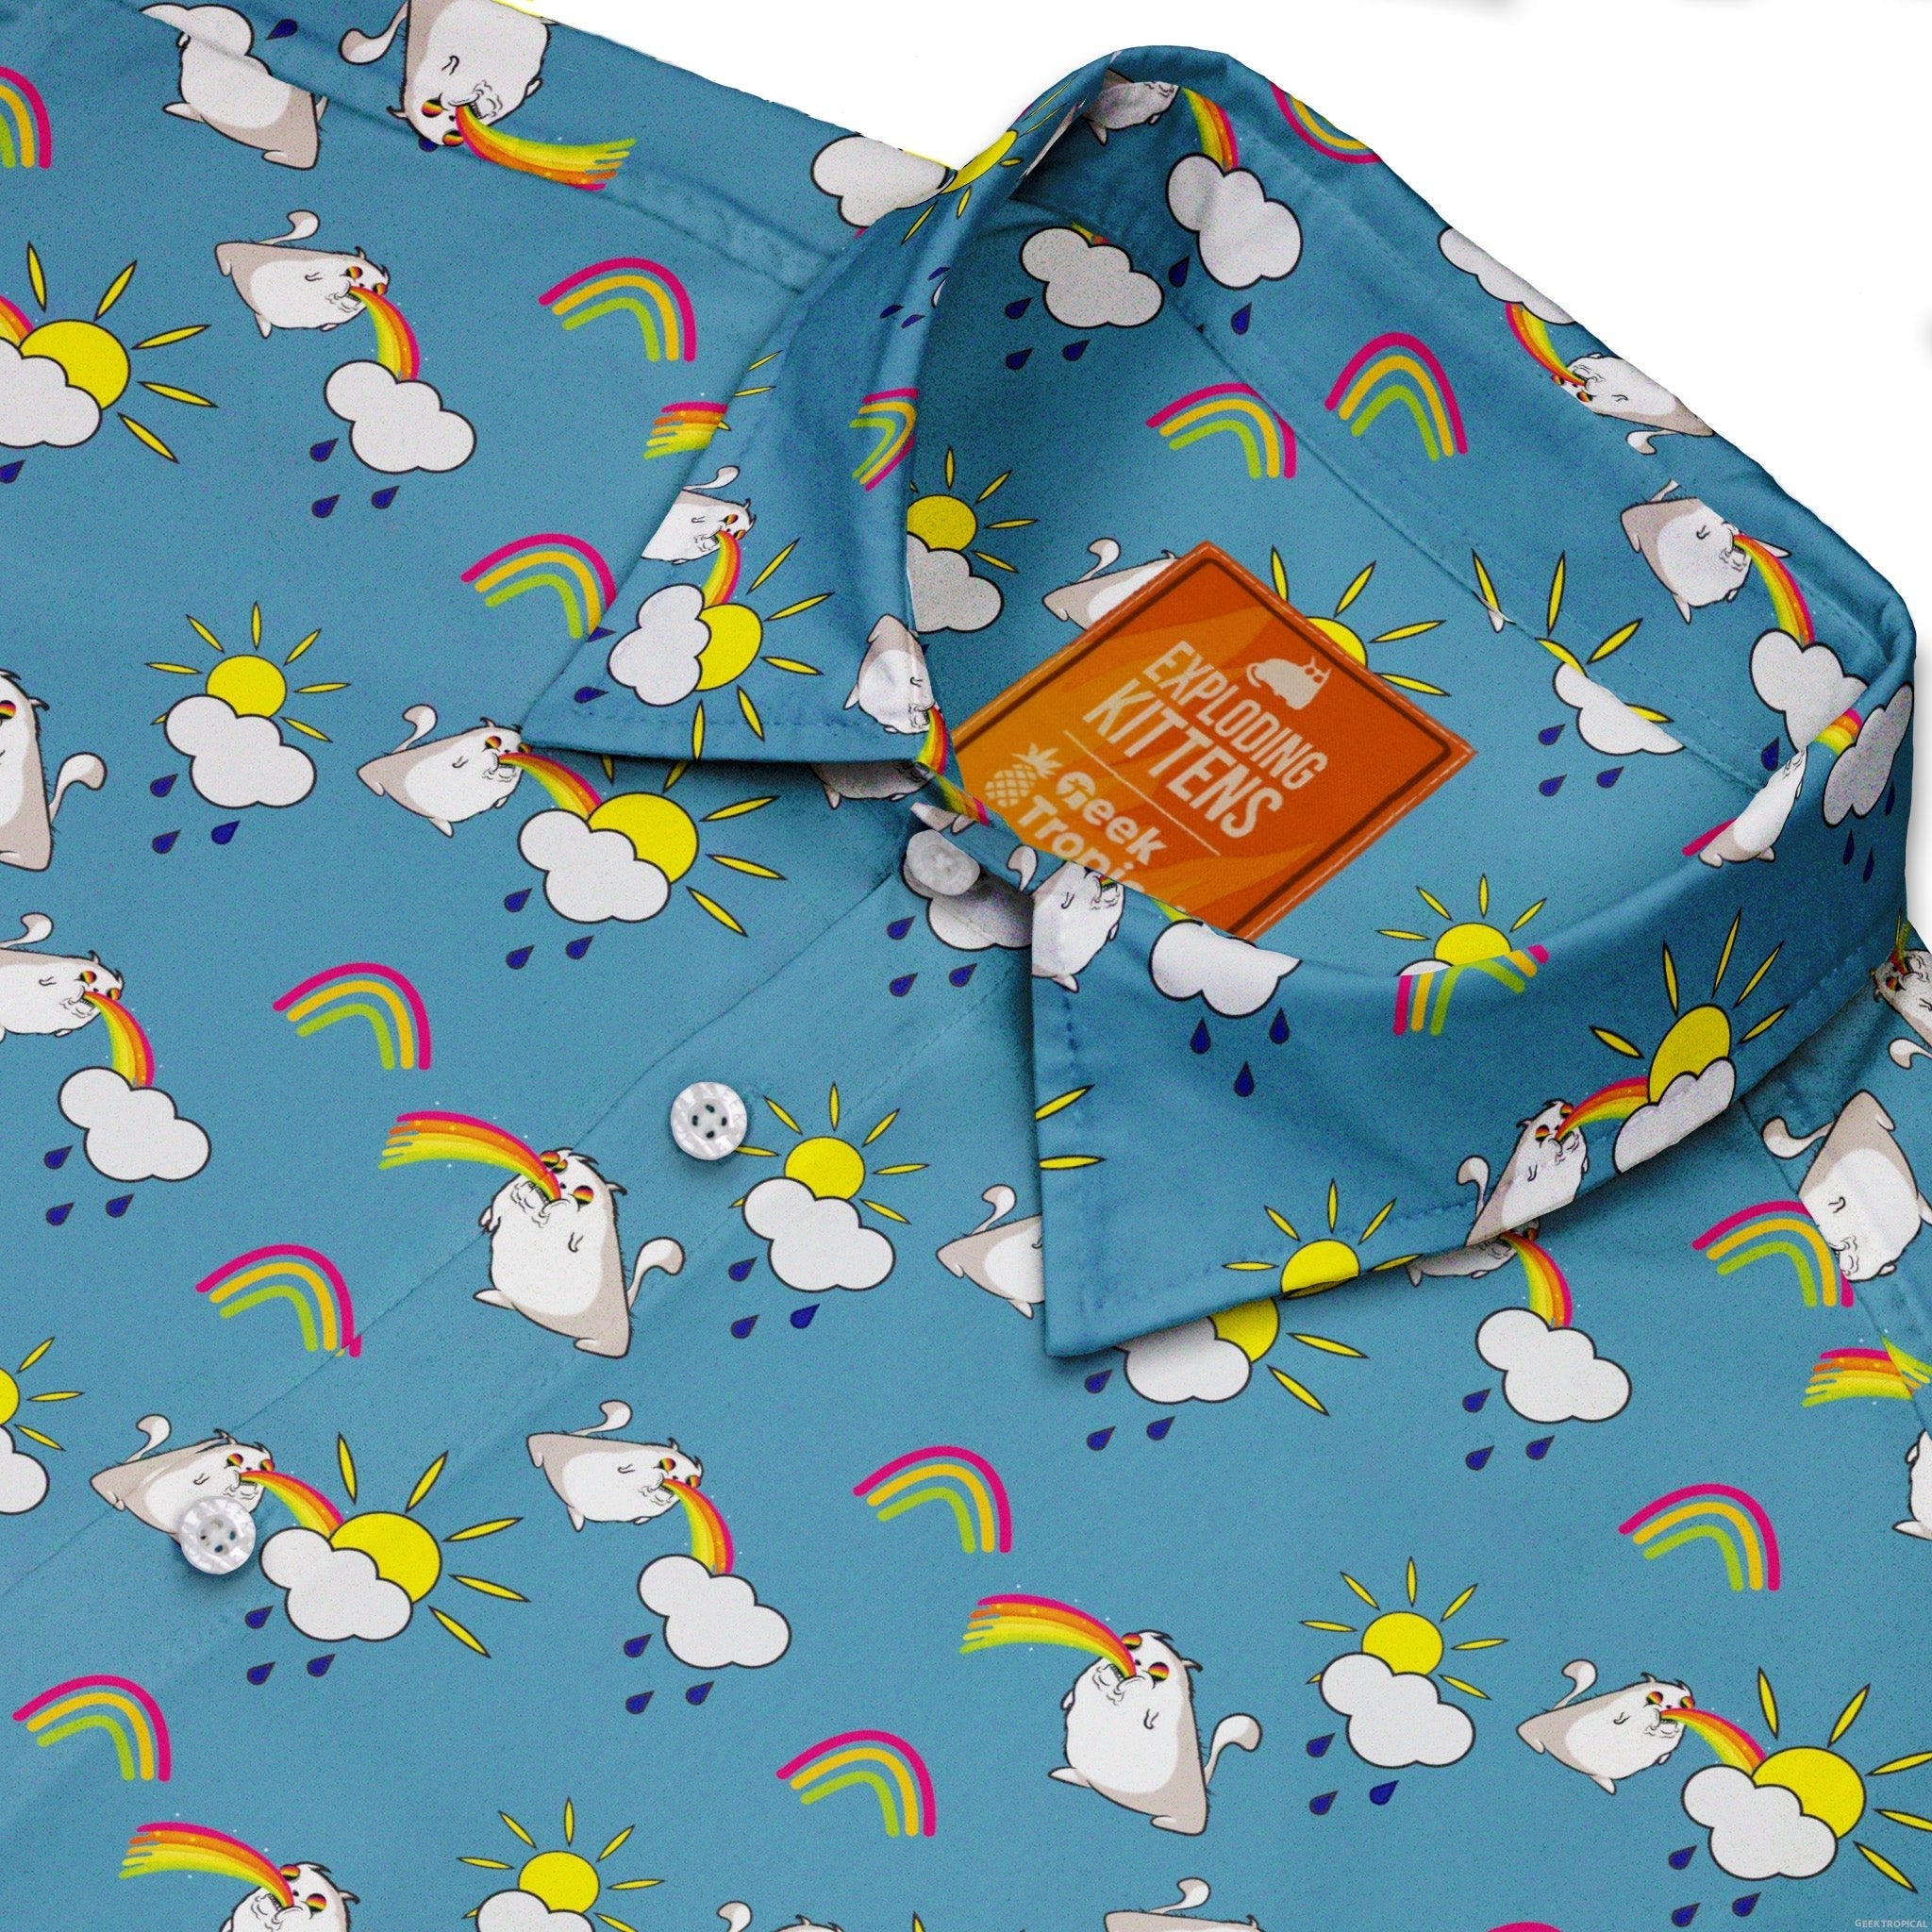 Exploding Kittens Rainbow Sky Cats Button Up Shirt - adult sizing - Animal Patterns - board game print